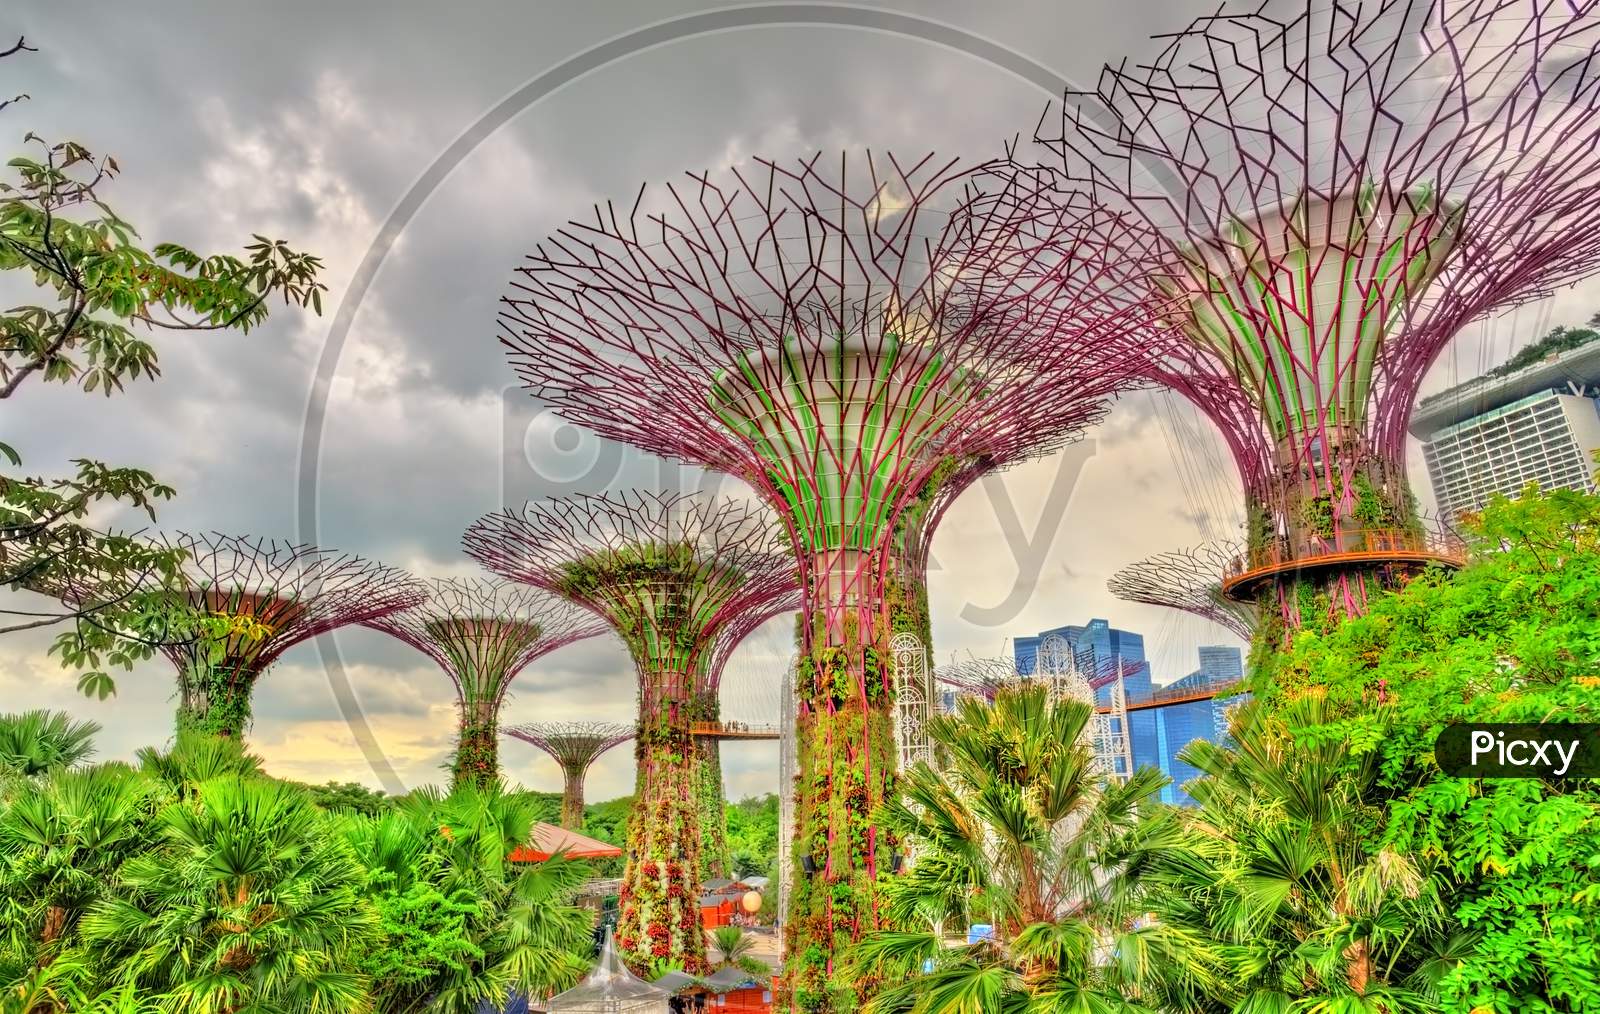 Gardens By The Bay, A Nature Park In Singapore